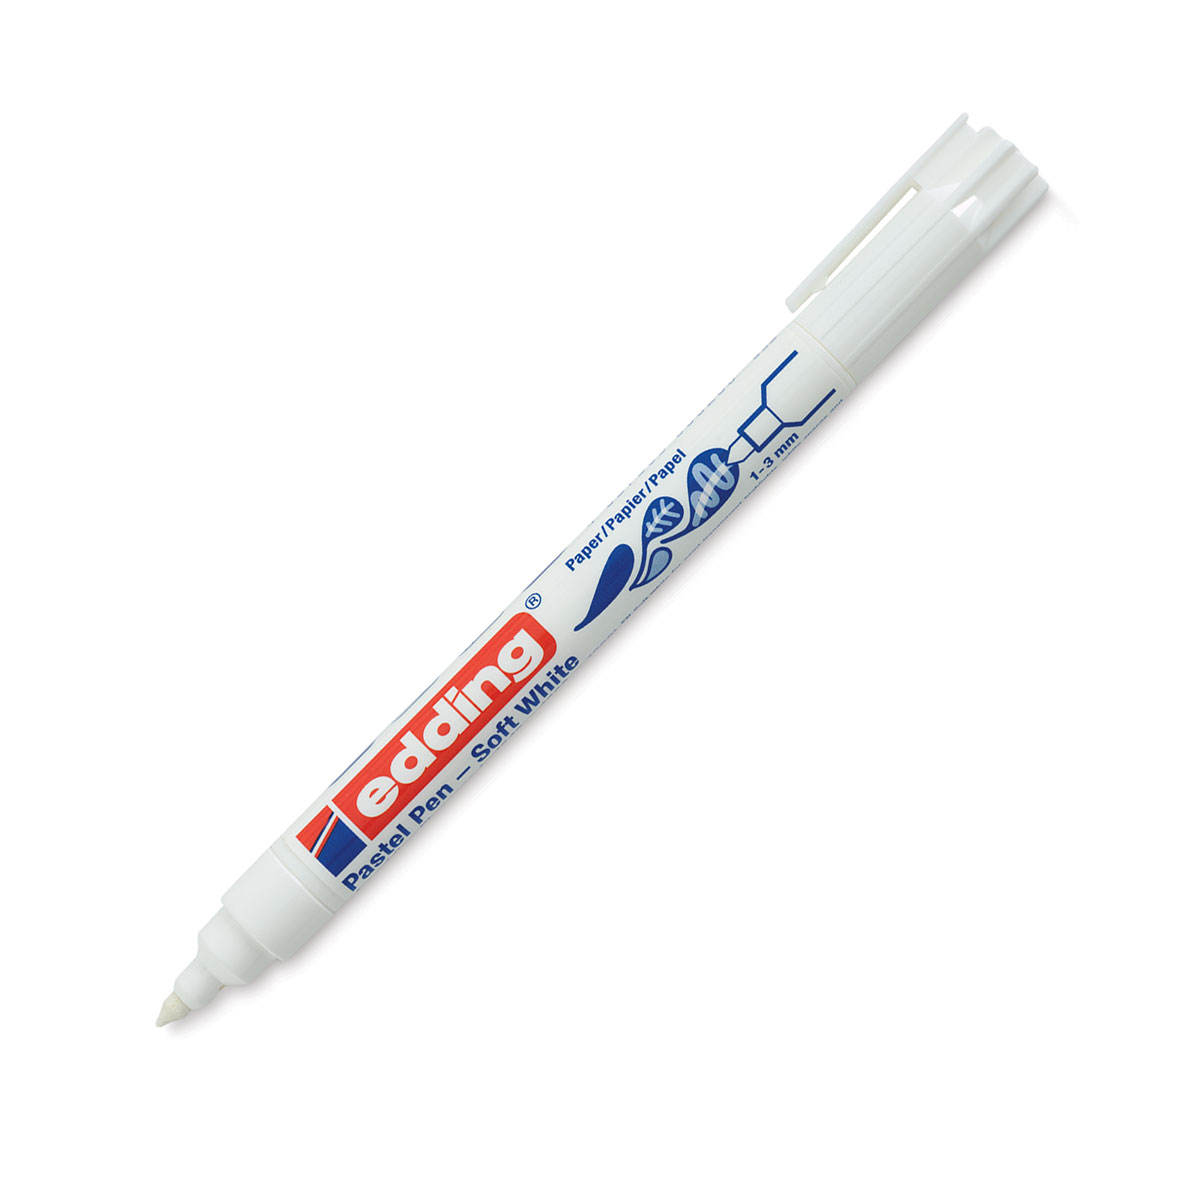 crown personality Forced Edding Soft White Pastel Pen | BLICK Art Materials